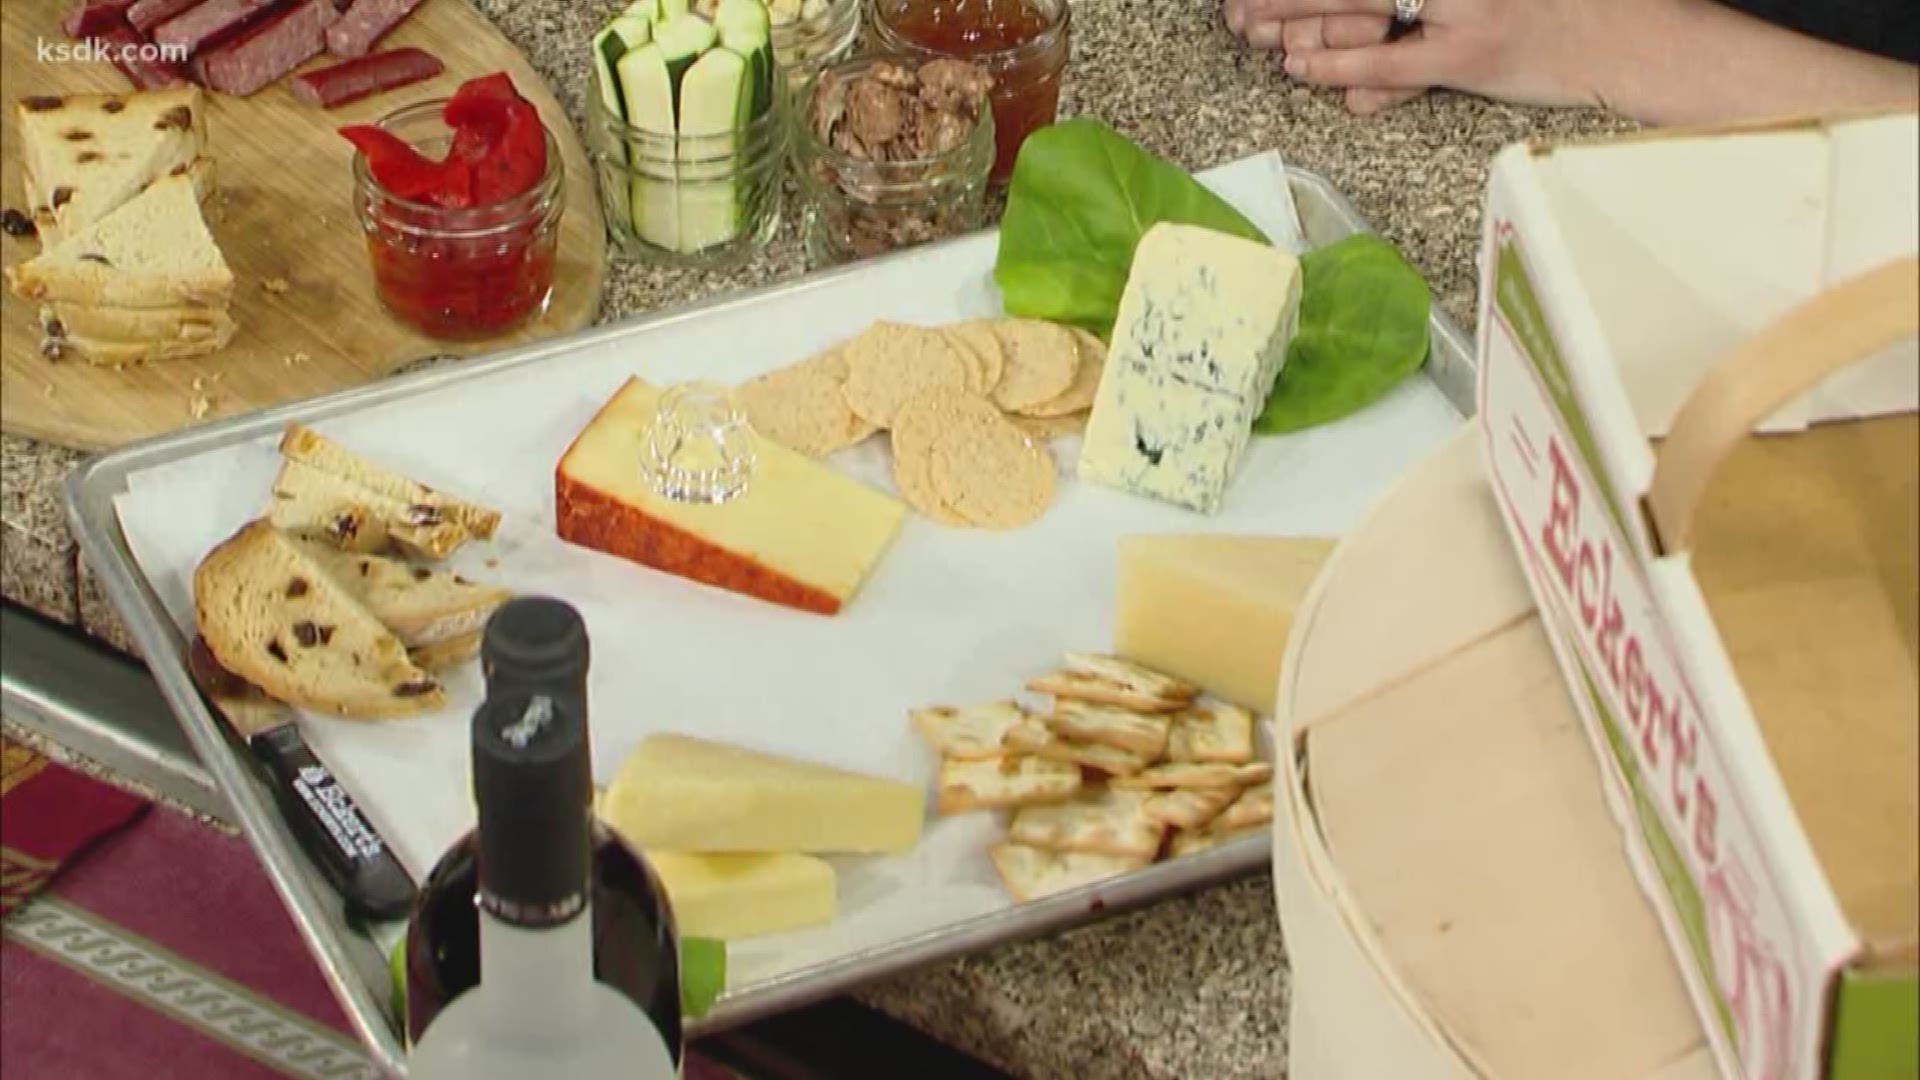 “Chris and I love to entertain in our home and we have made our fair share of cheese and meat boards over the years! Here is a little trick to help us, and hopefully you, create a uniquely delicious cheese and meat board for your next gathering.”